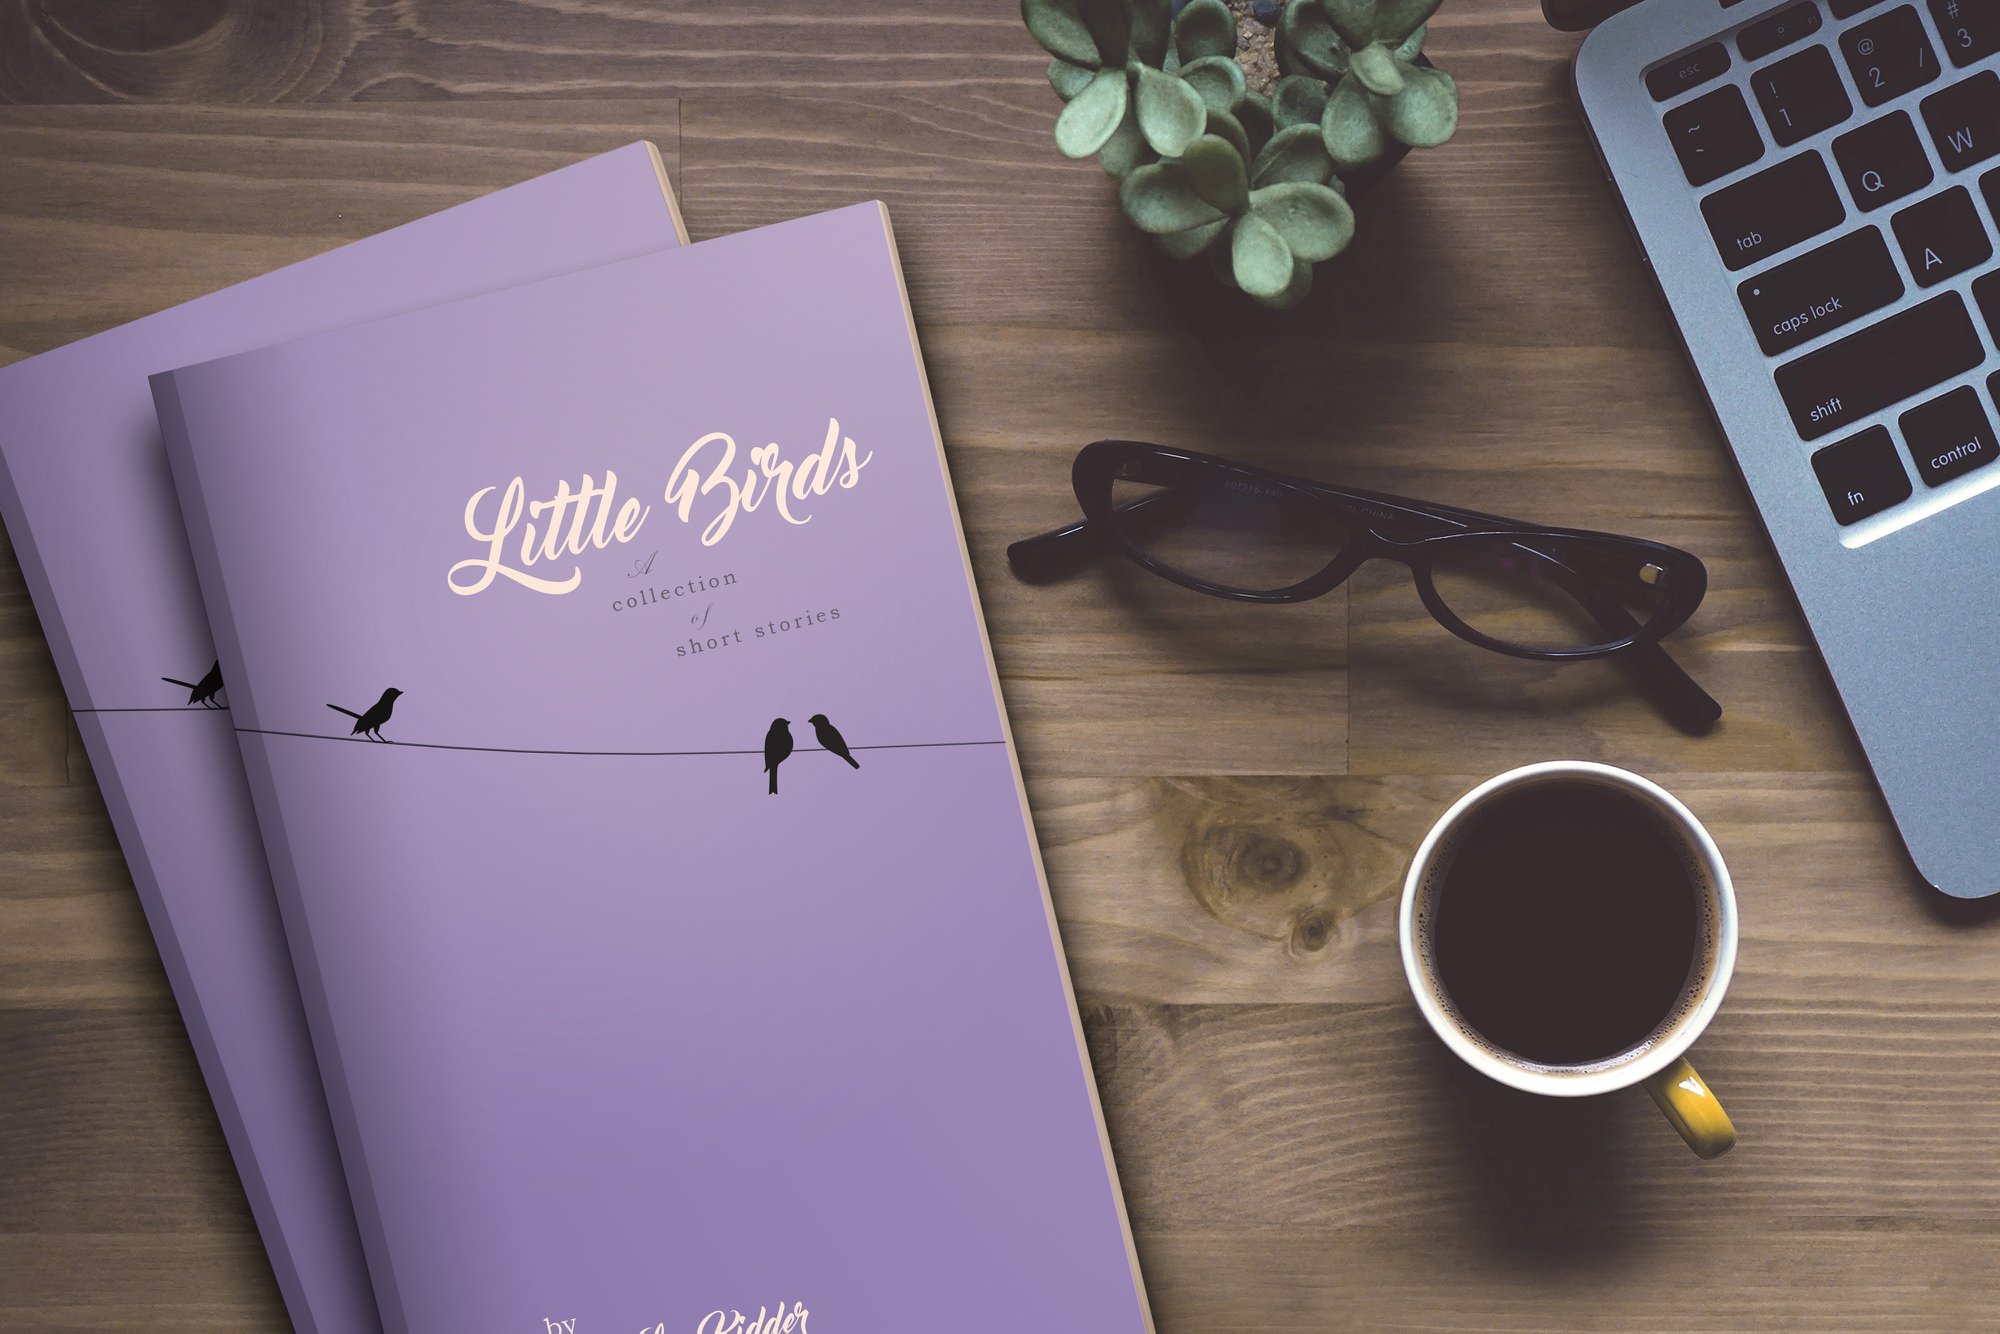 Book Cover Of Little Birds On A Table Next To Coffee And A Laptop